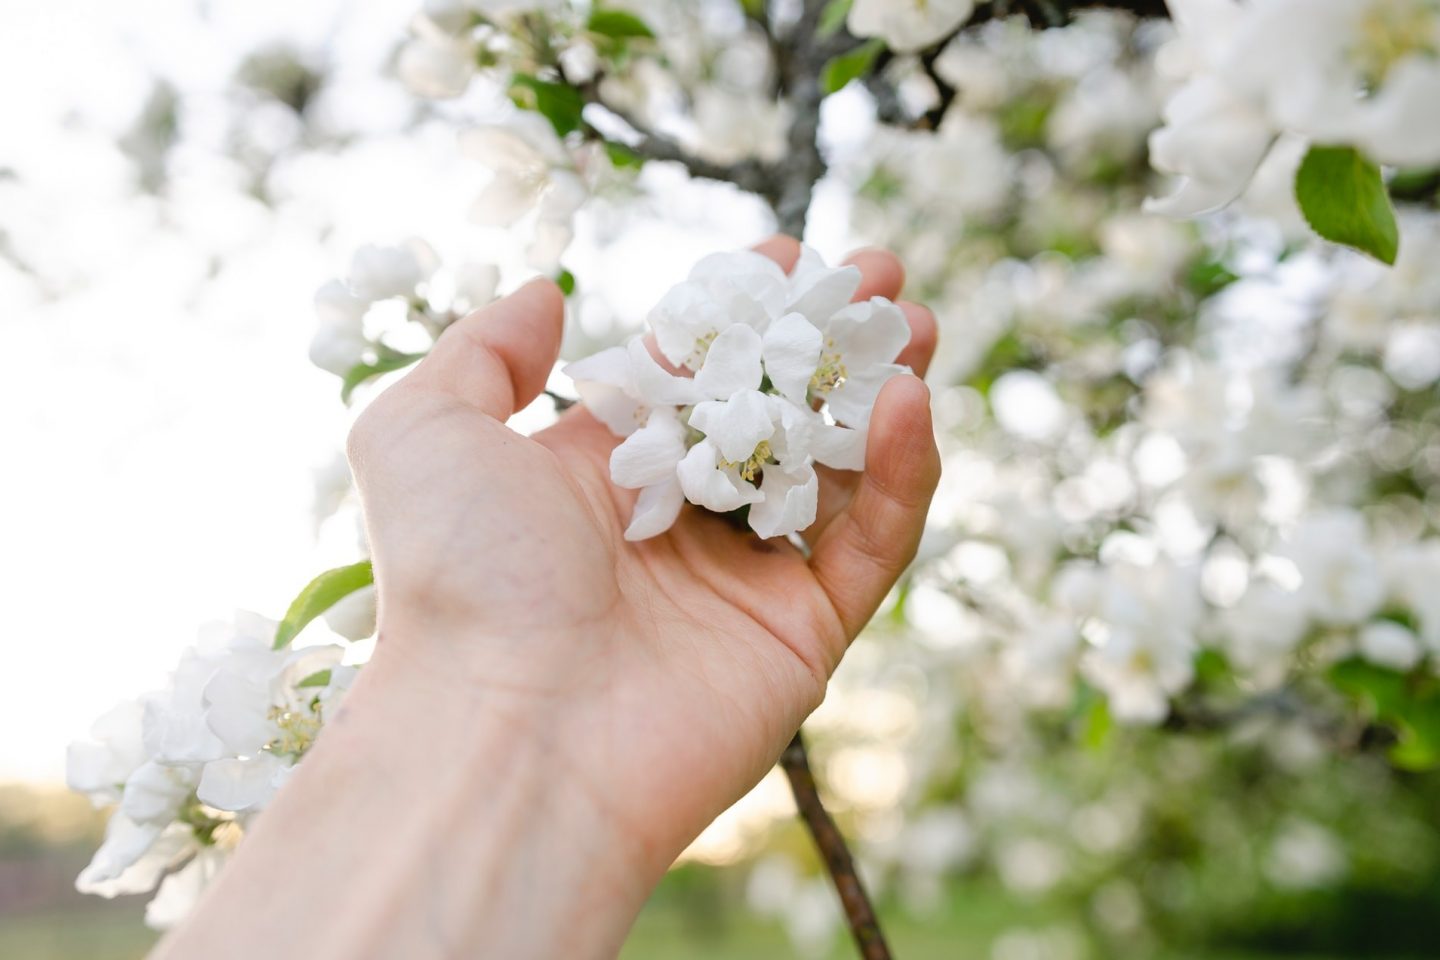 A hand gently holds some pure white spring blossom growing on a tree in a garden